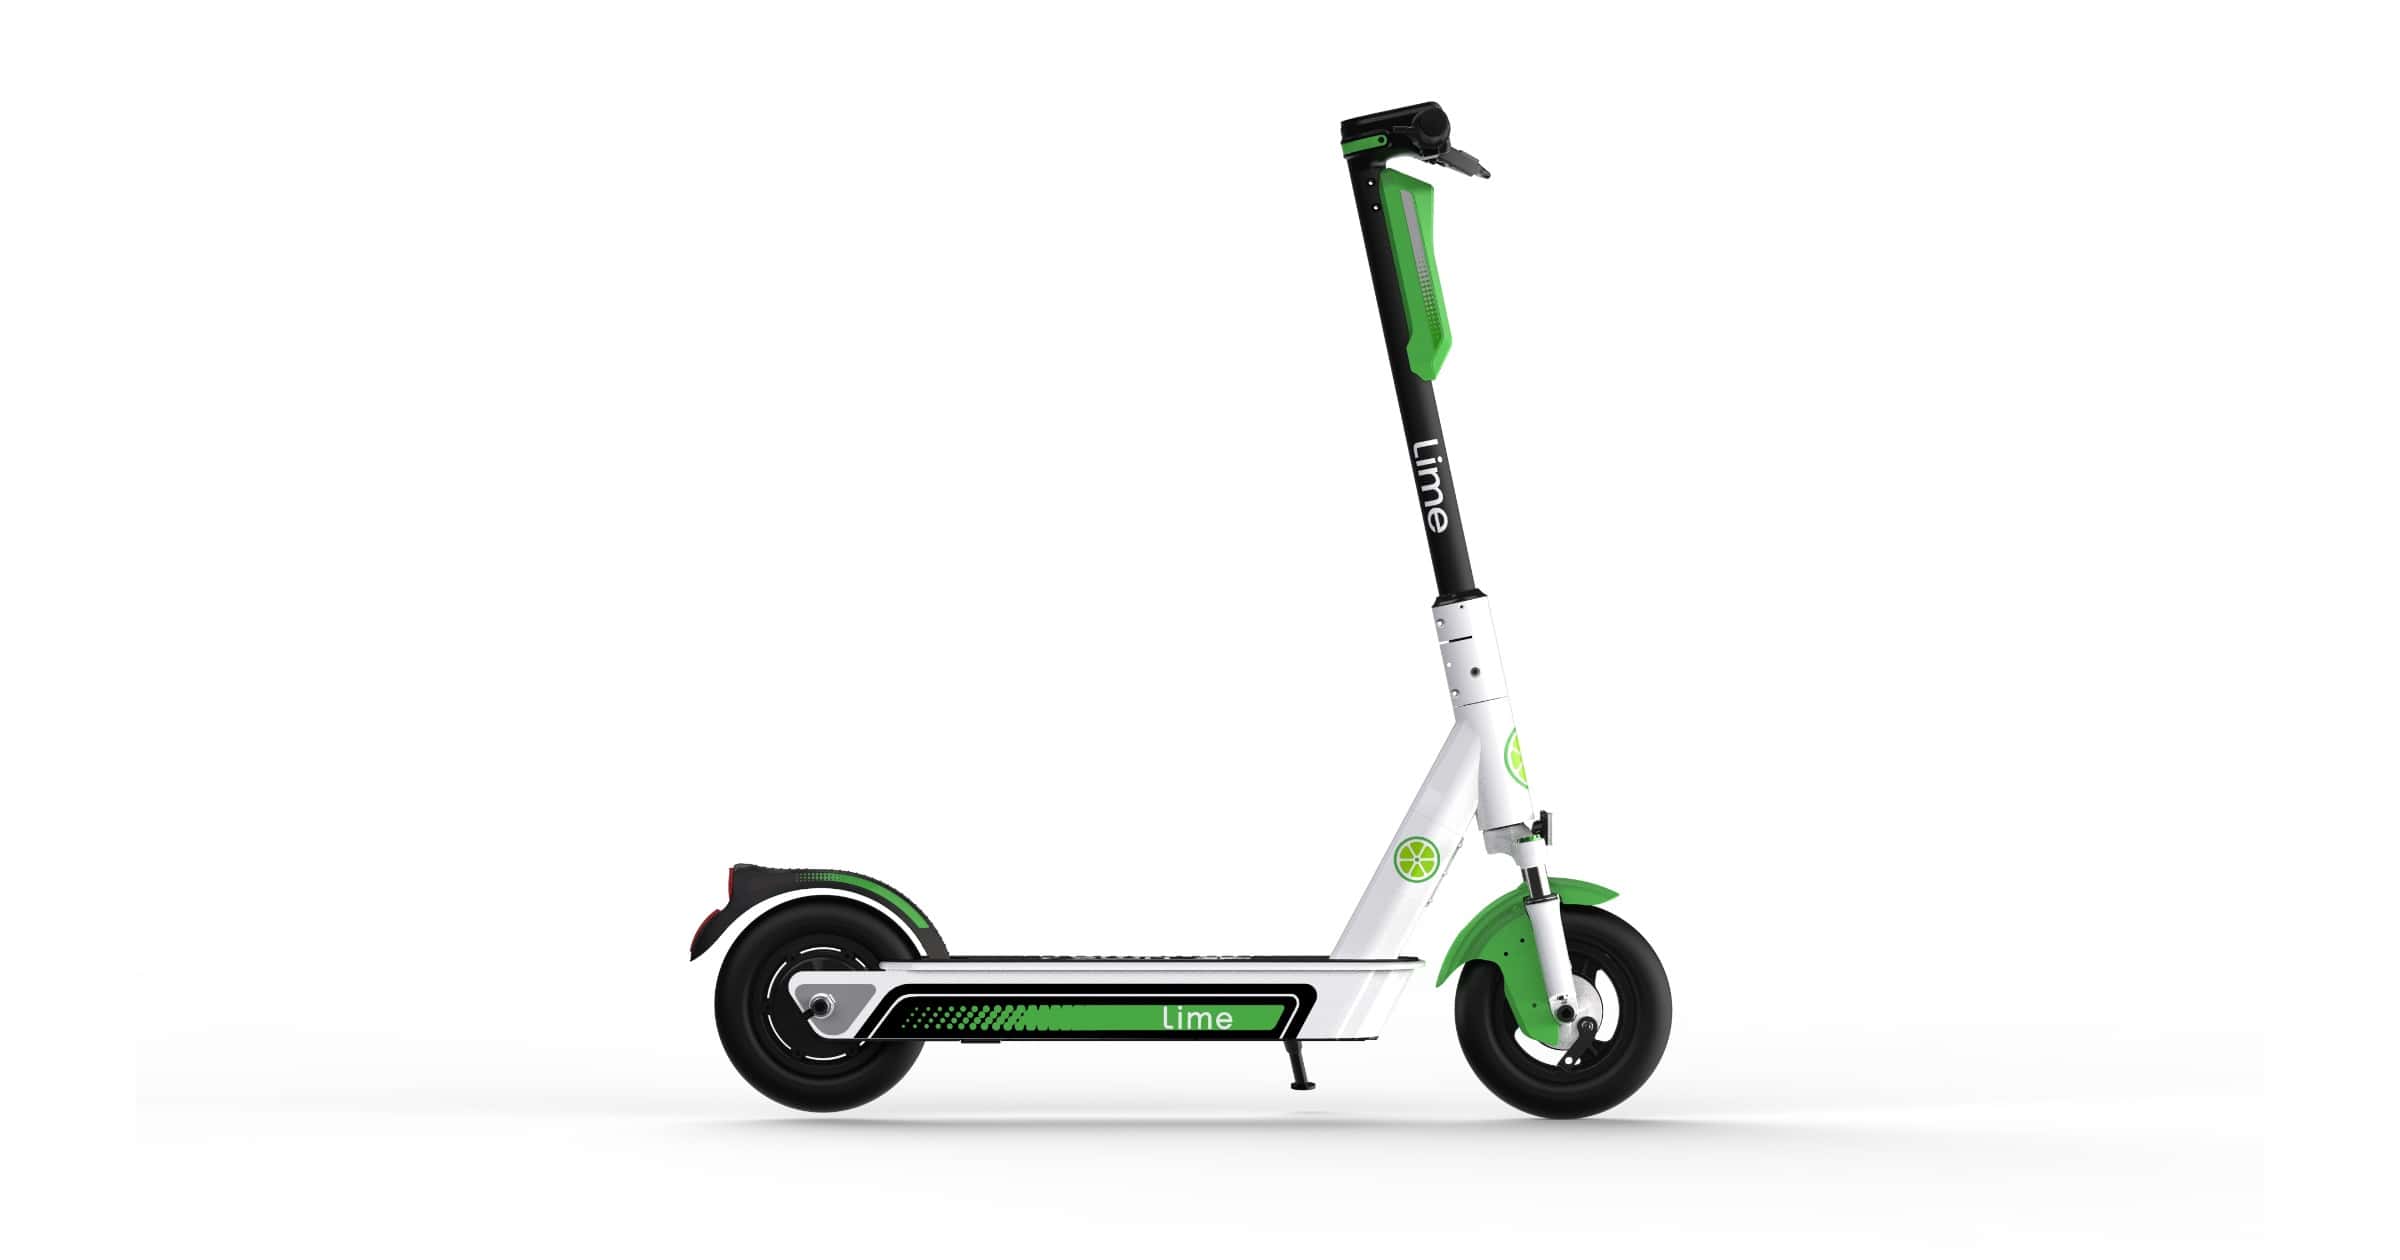 Scooter-Sharing Service ‘Lime’ Adds iOS 14 App Clips